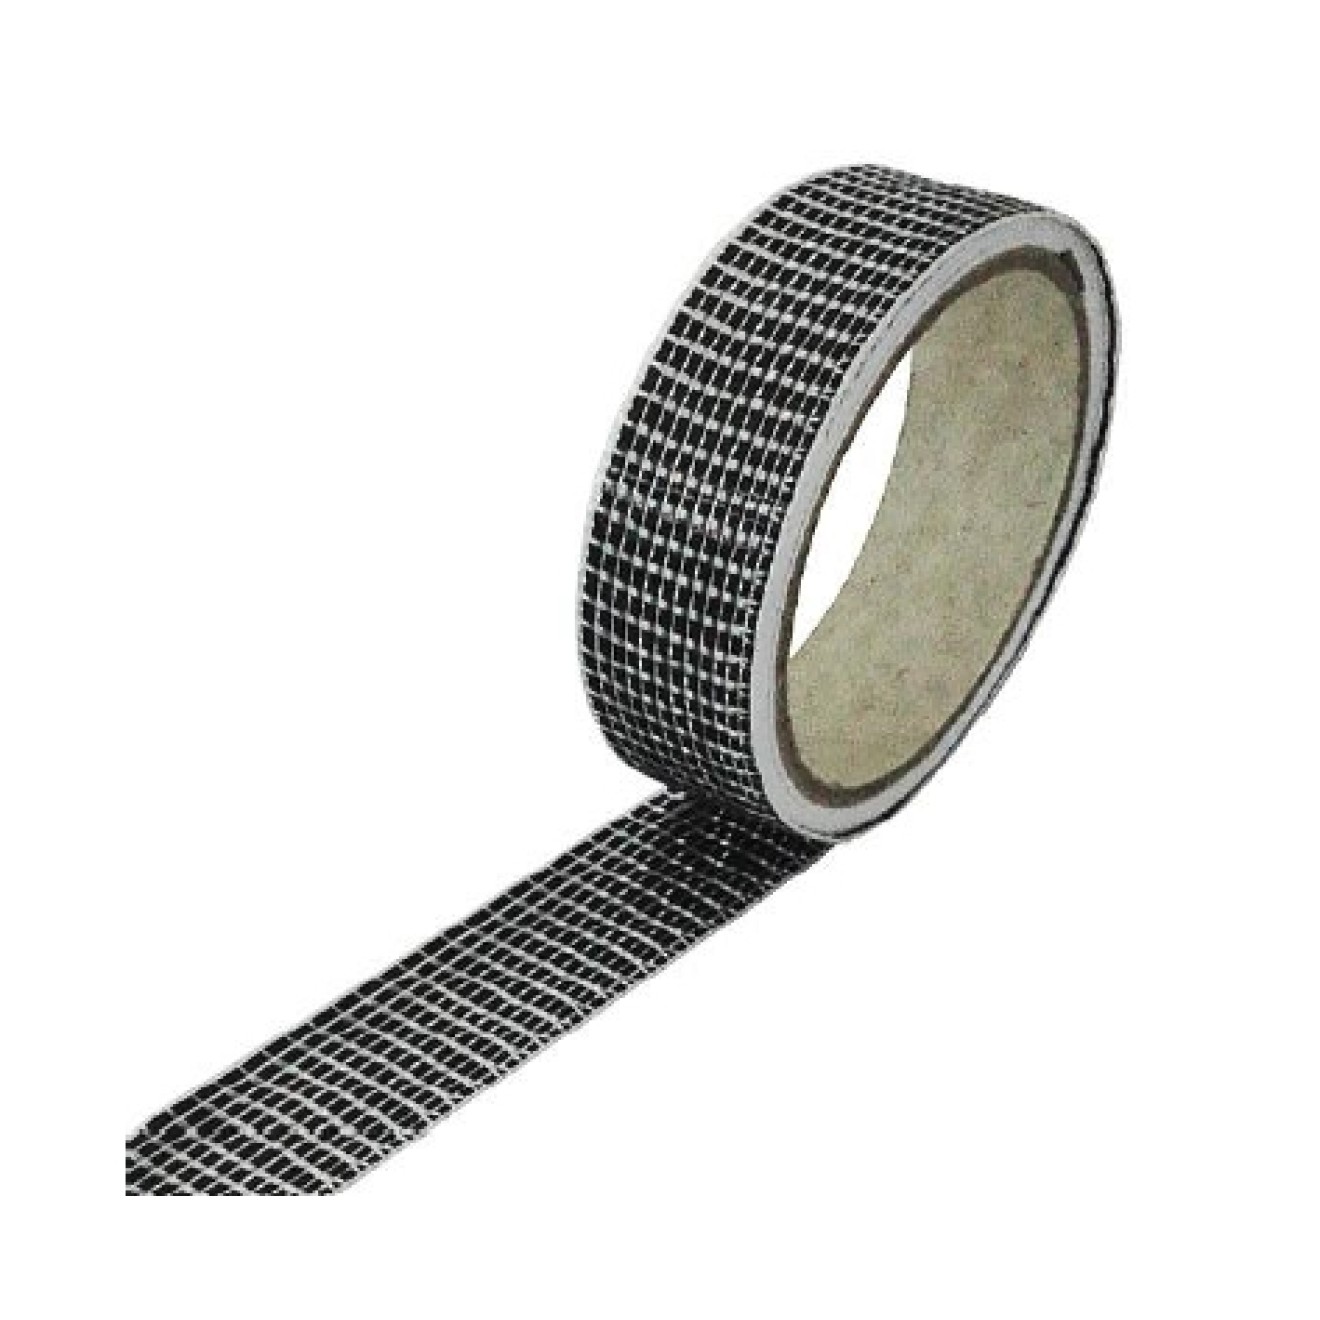 Woven Carbon-UD 125g/m² width 25mm unidirectional